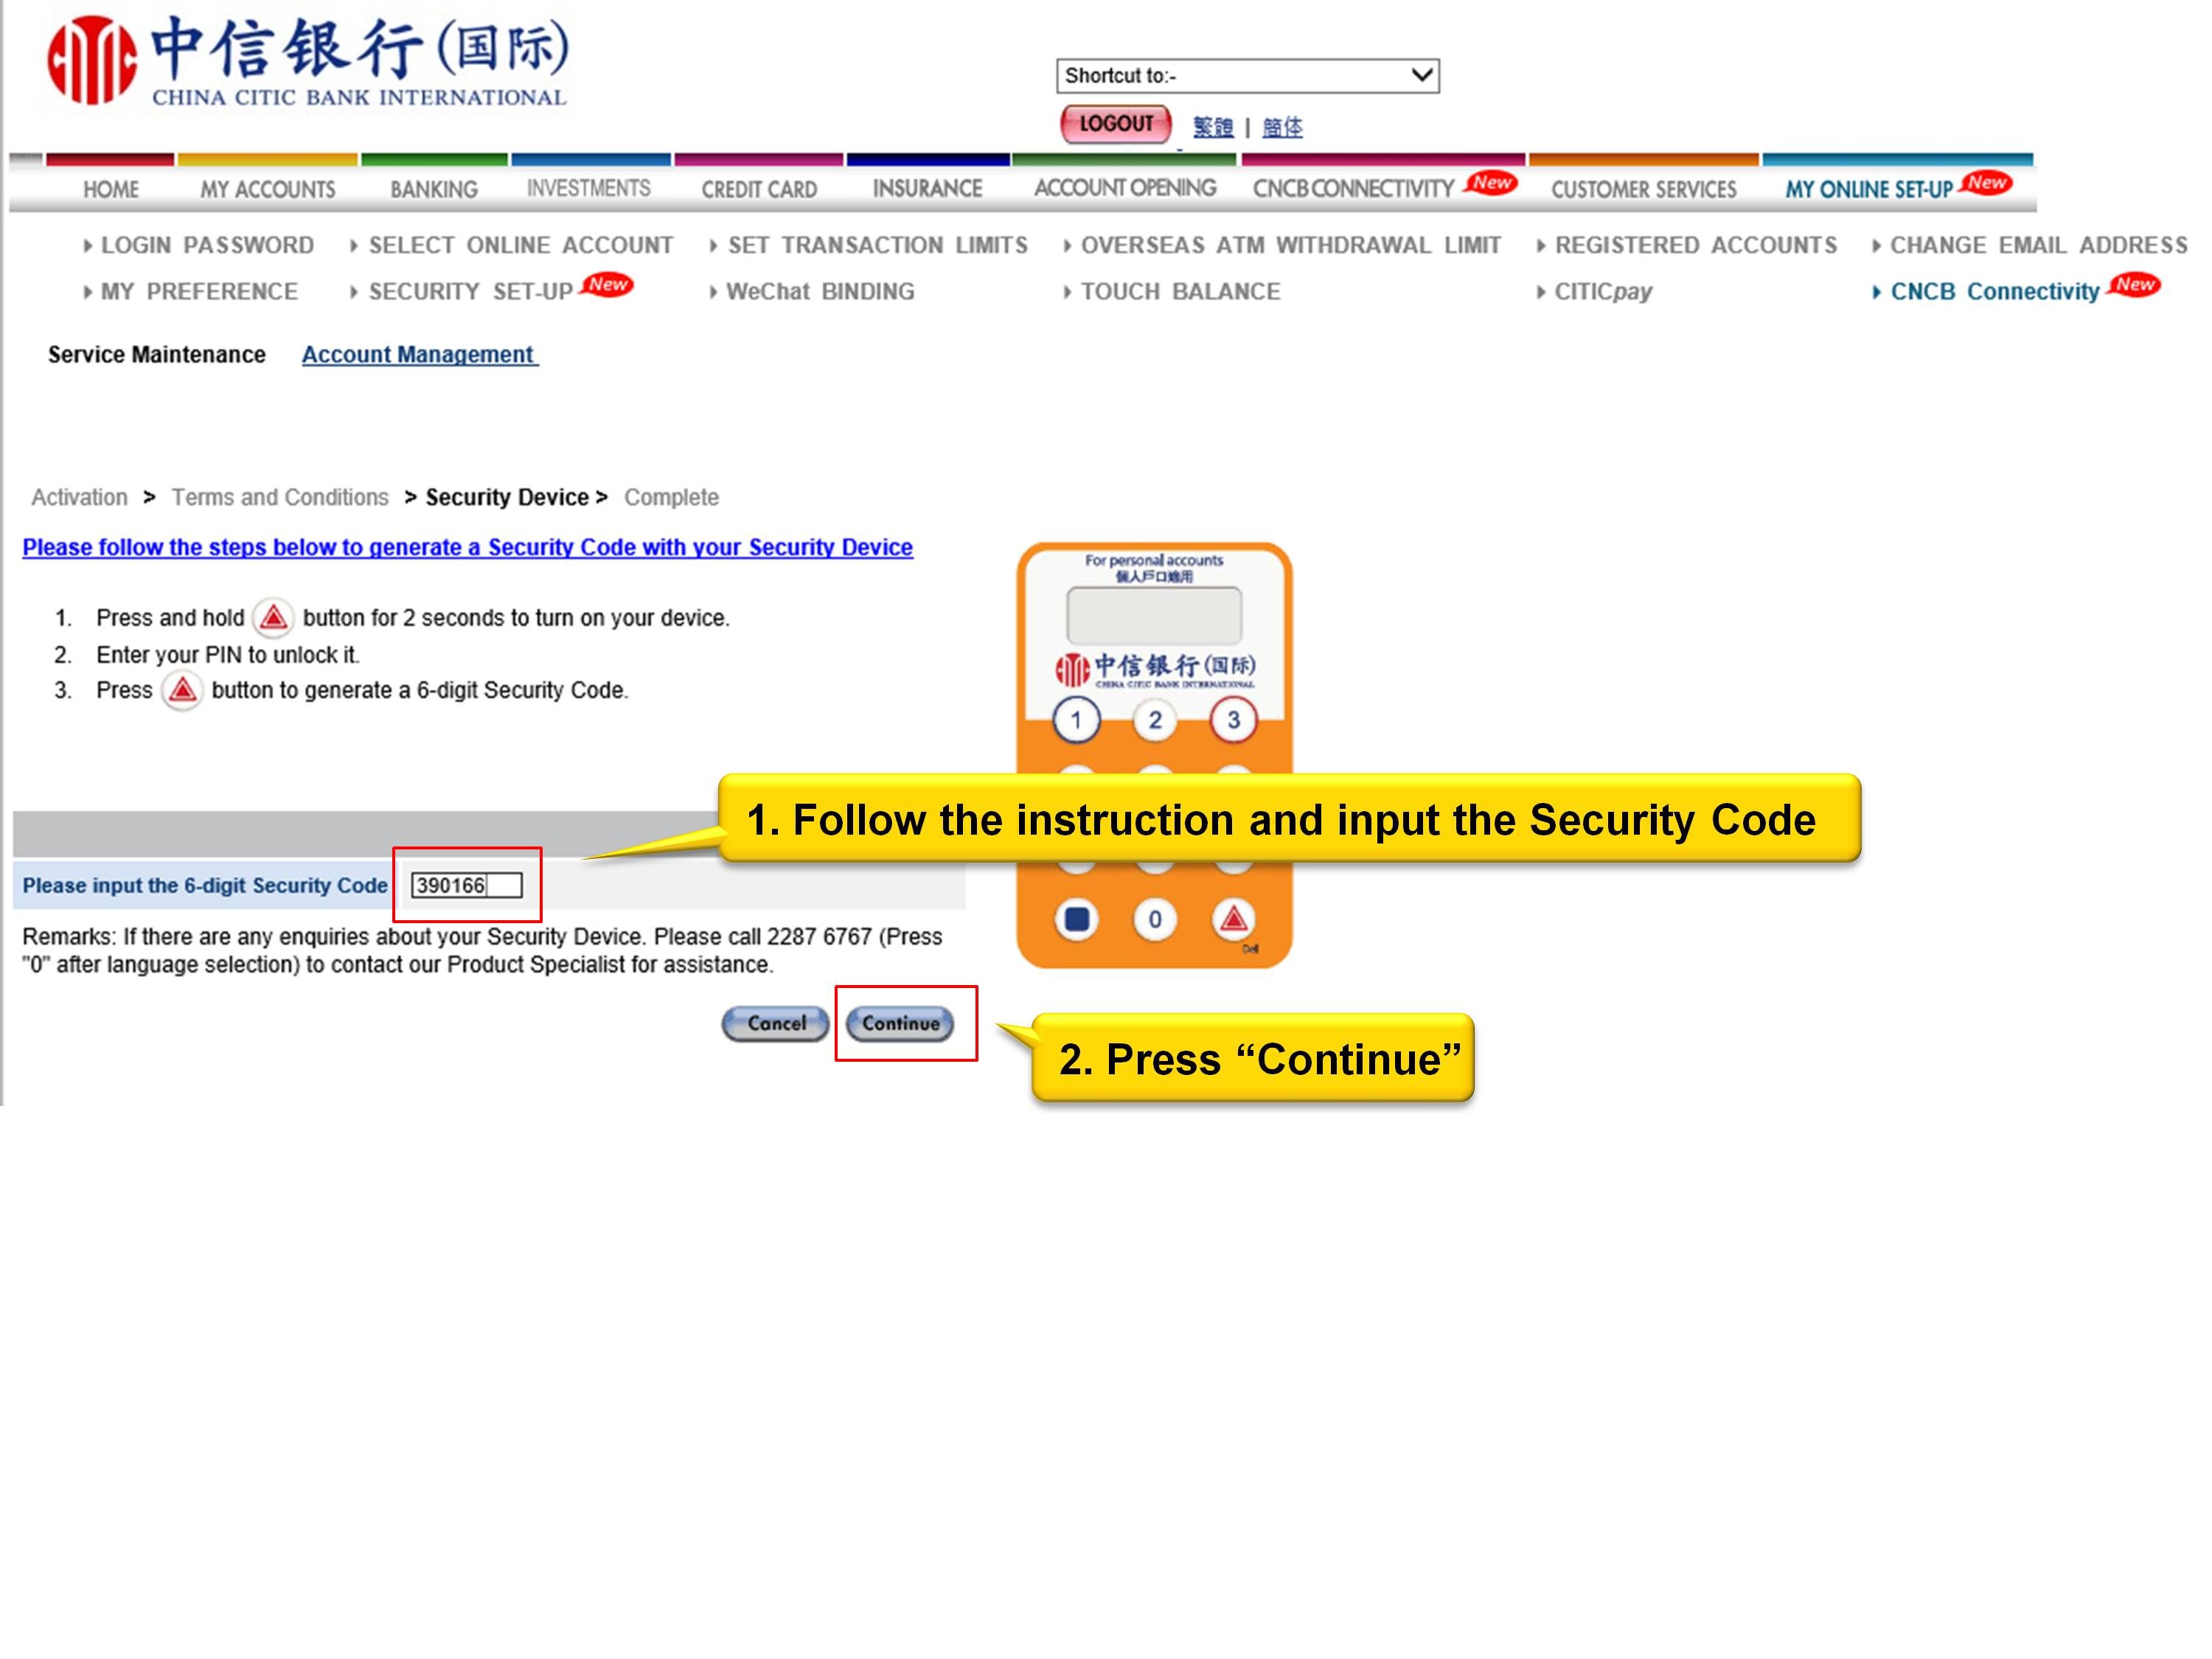 1. Follow the instruction and input the Security Code 2. Press "Continue"